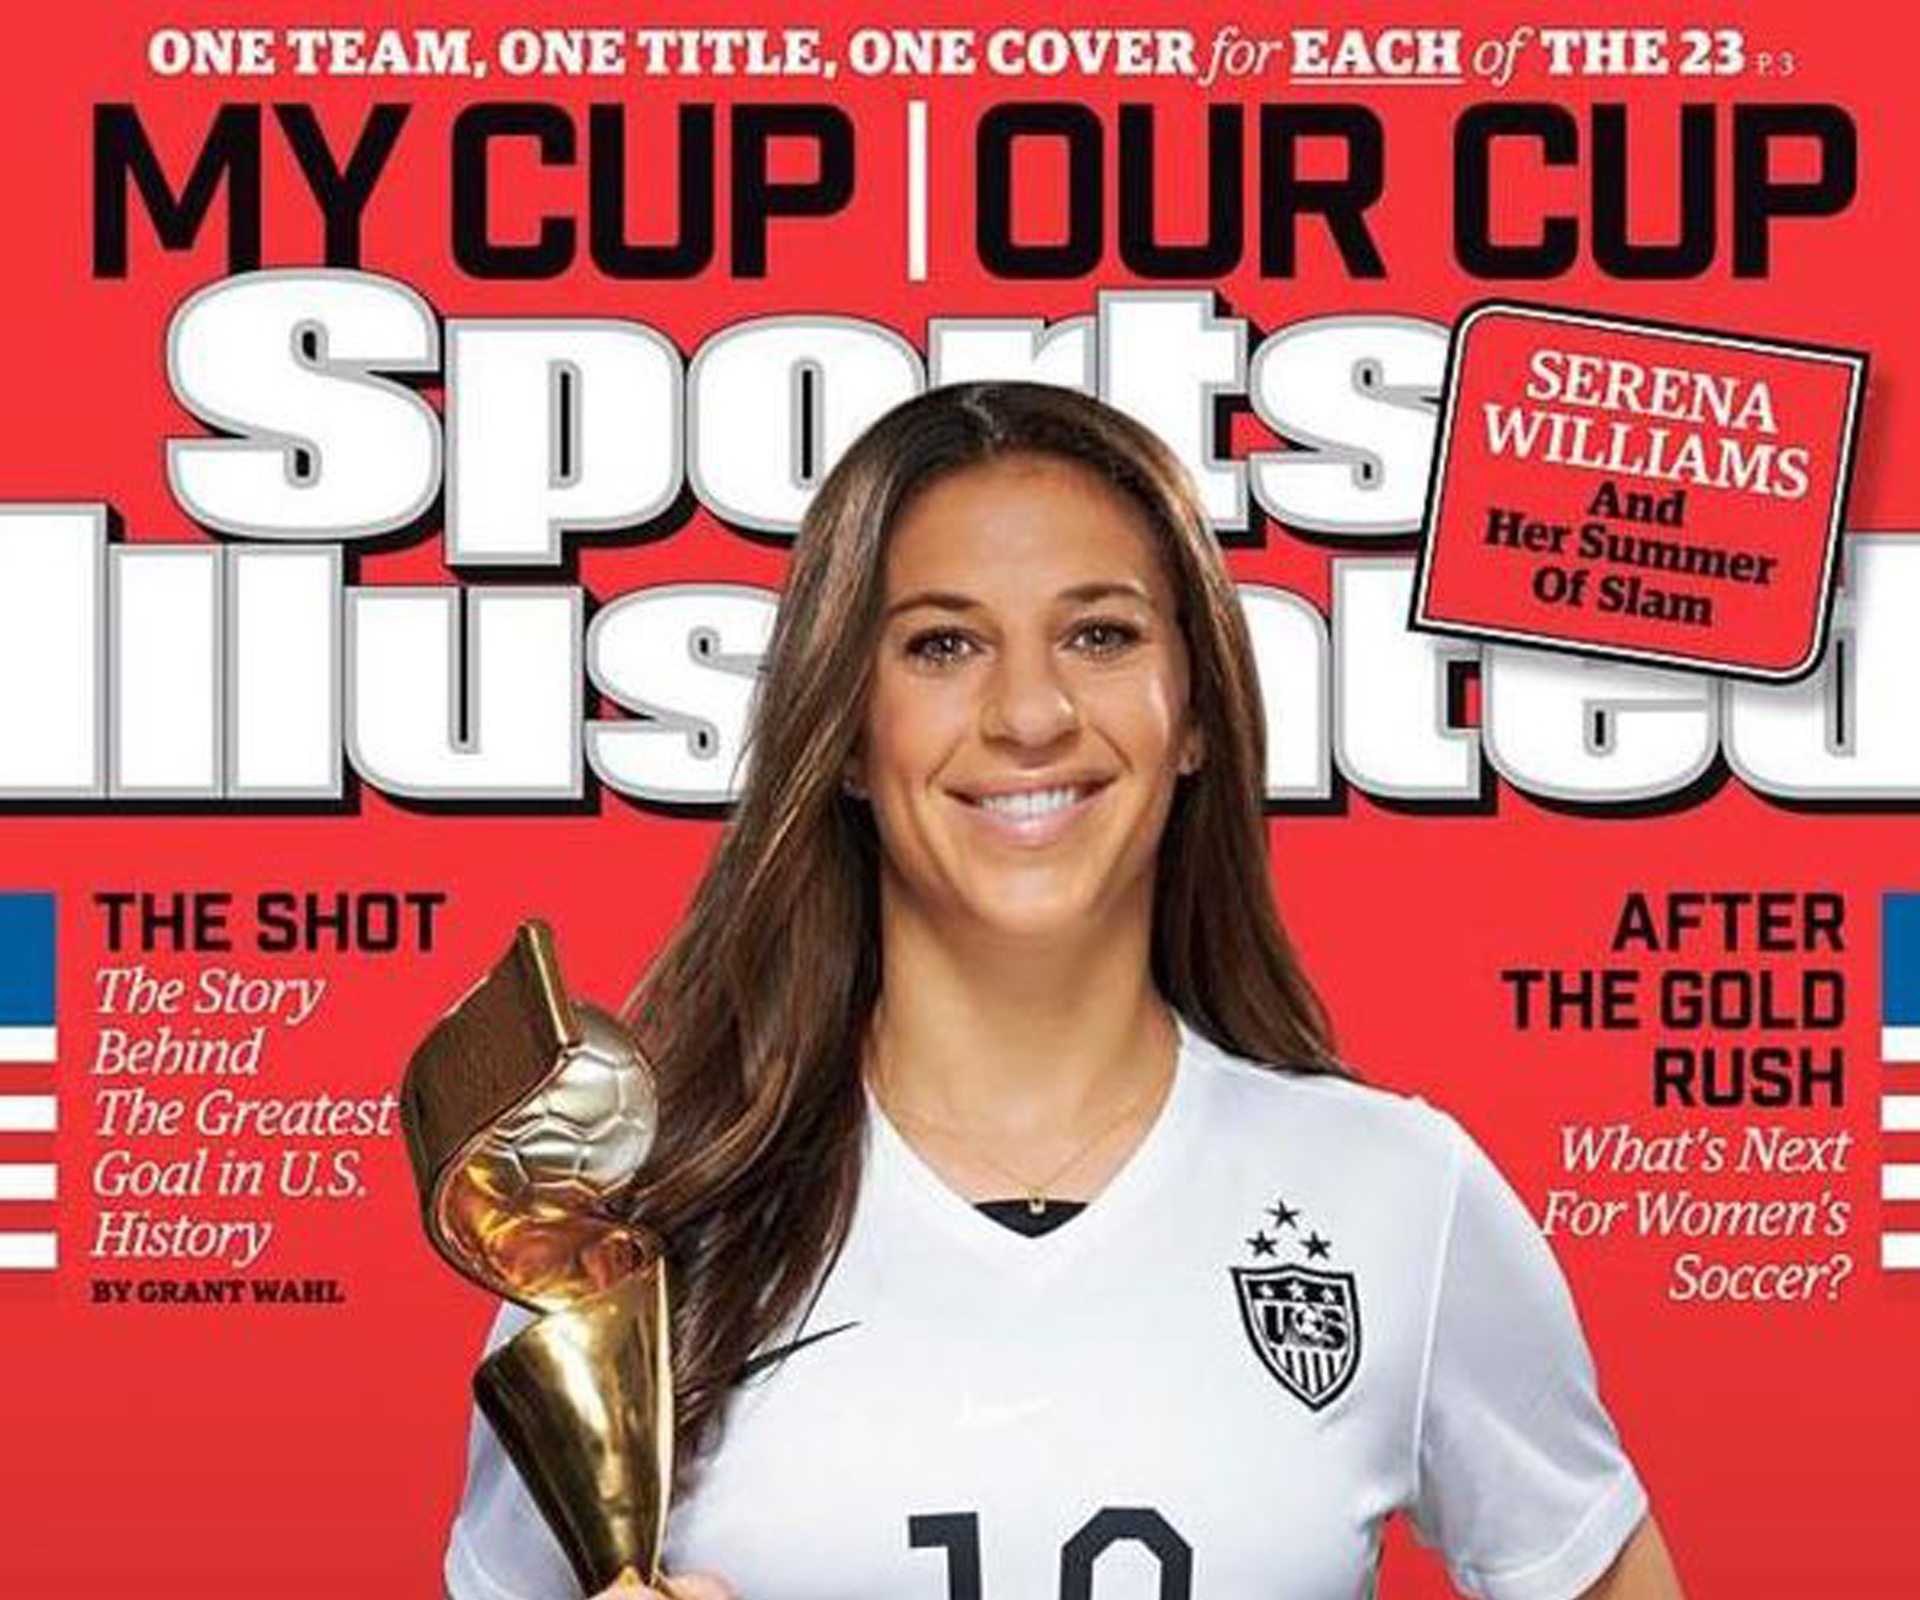 Women’s soccer champions honoured with historic covers